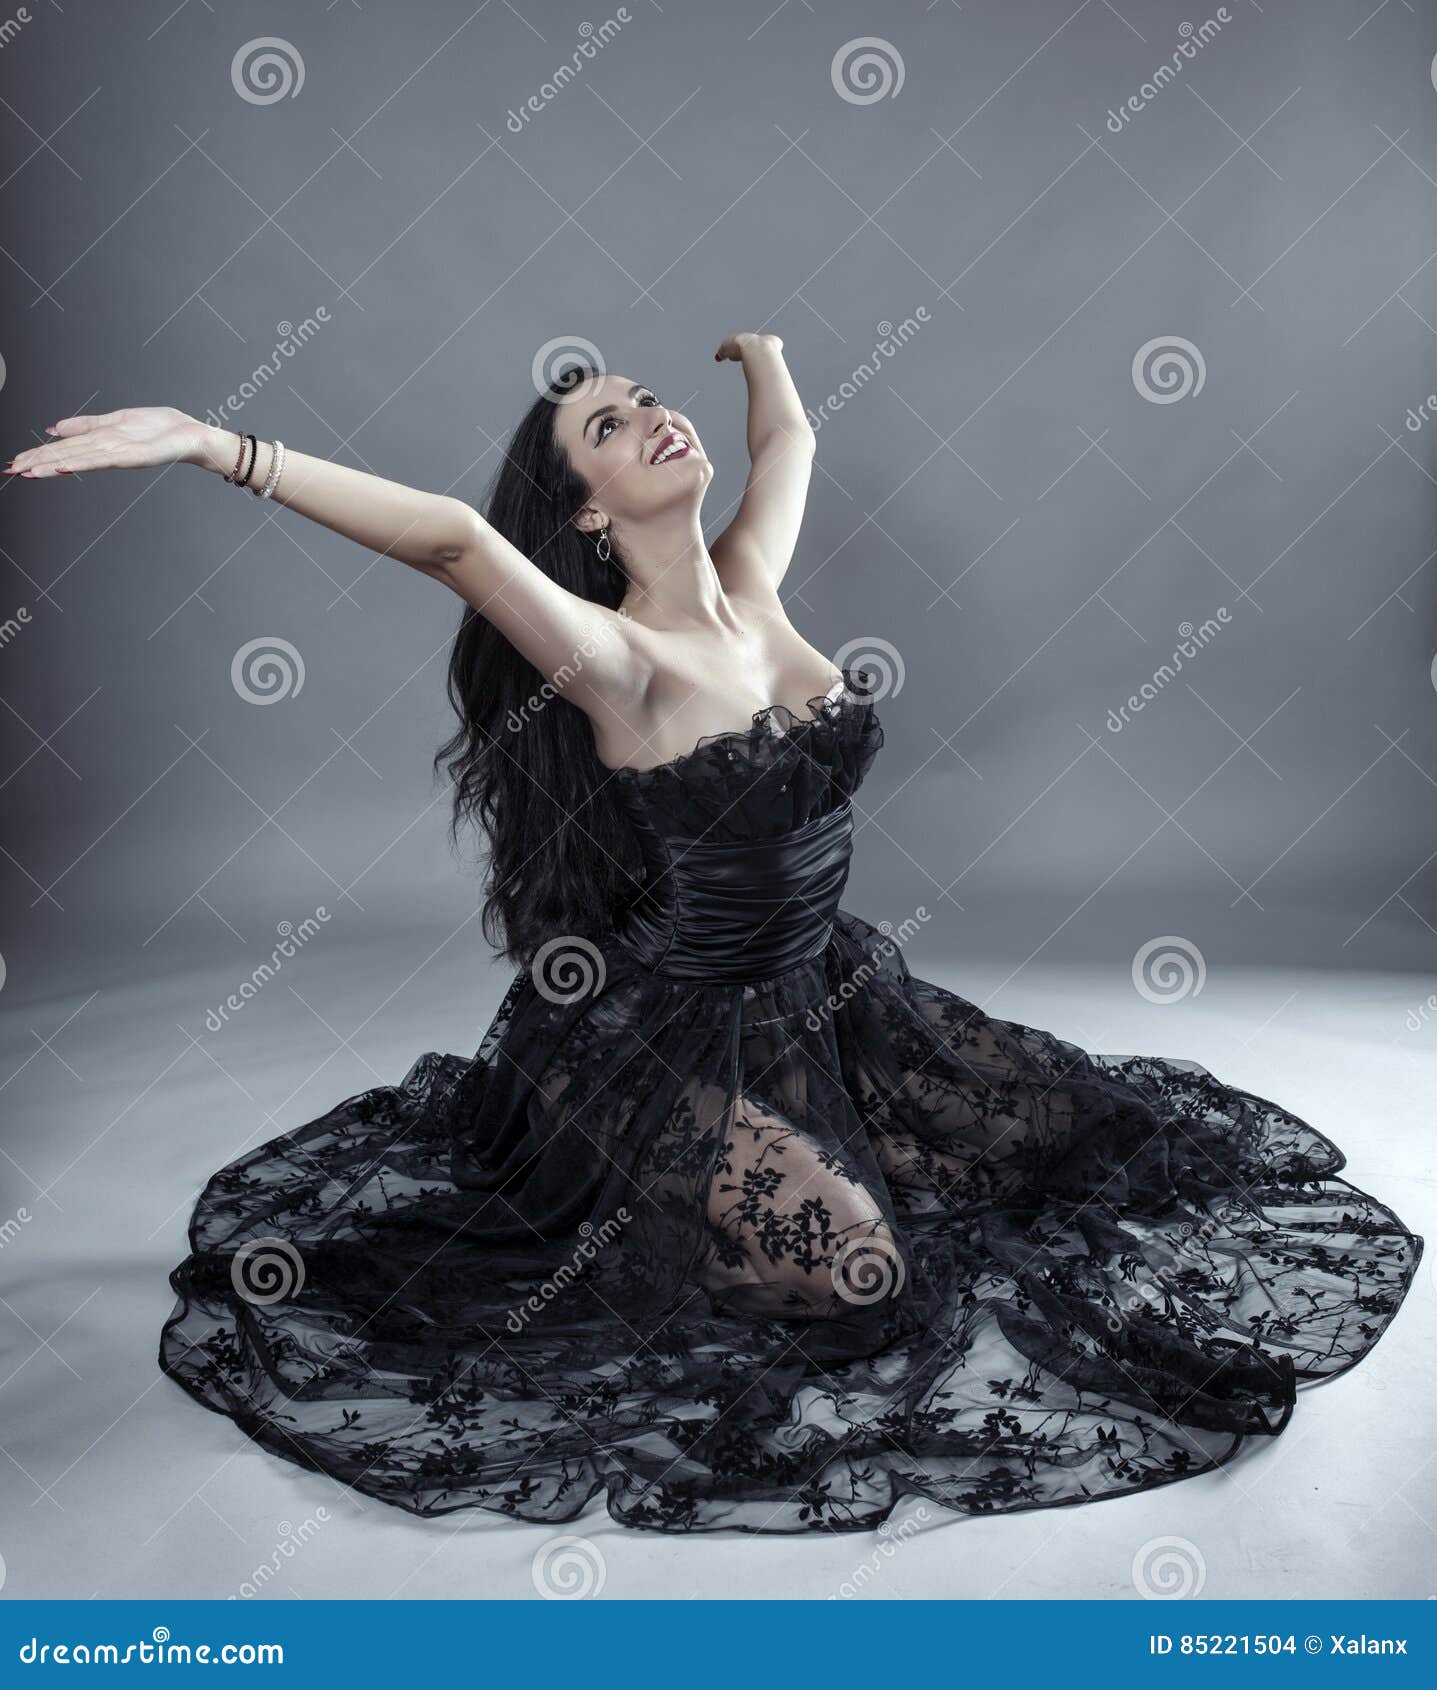 Glamour Model in Black Lace Dress Stock Photo - Image of full, fashion ...